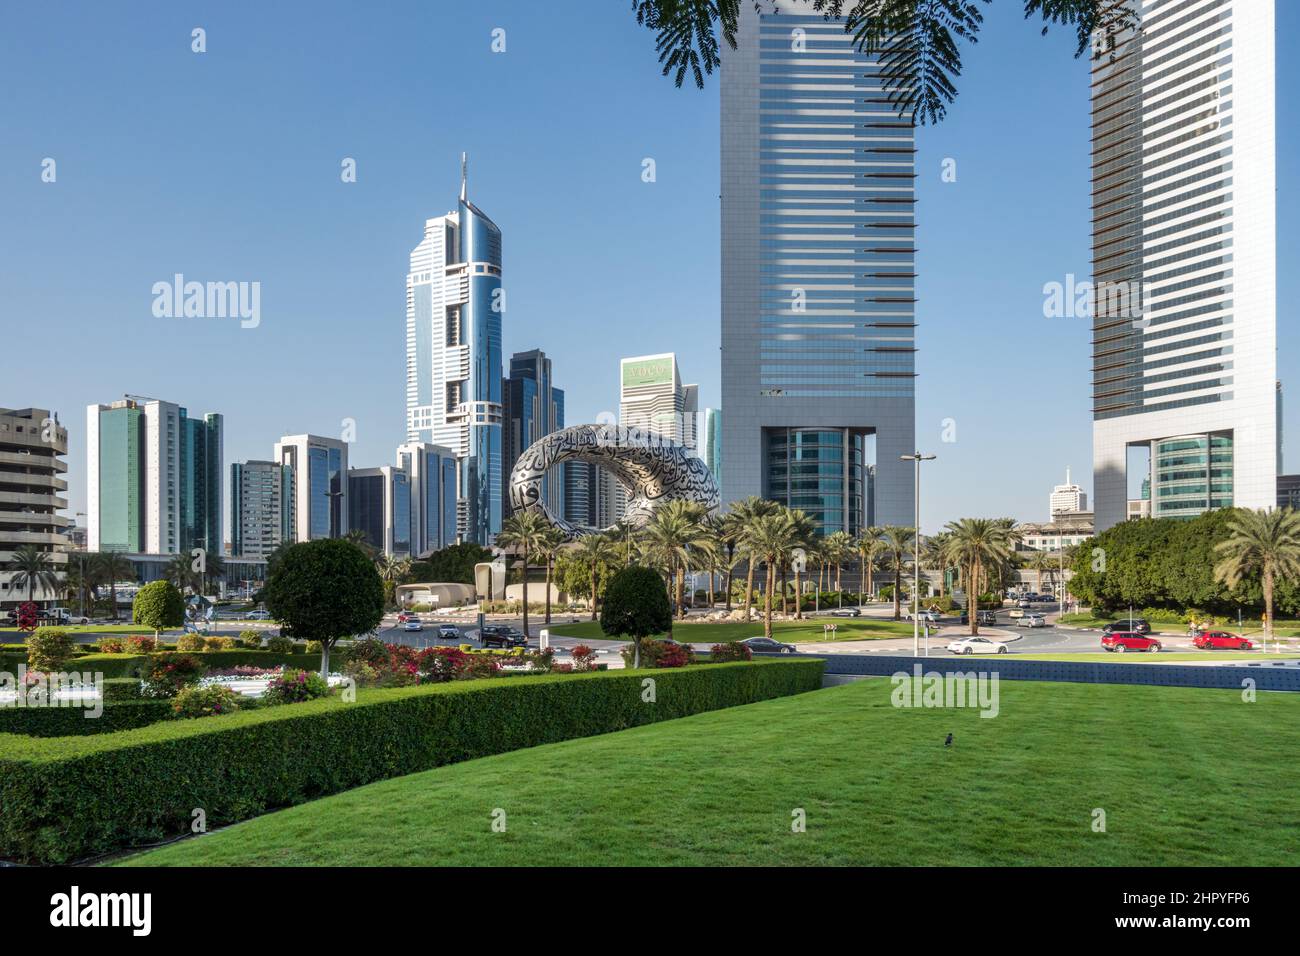 Jumeirah Emirates Towers and the oval shaped Museum Of The Future next to the Sheikh Zayed Road, viewed from the DIFC area in Dubai, UAE Stock Photo